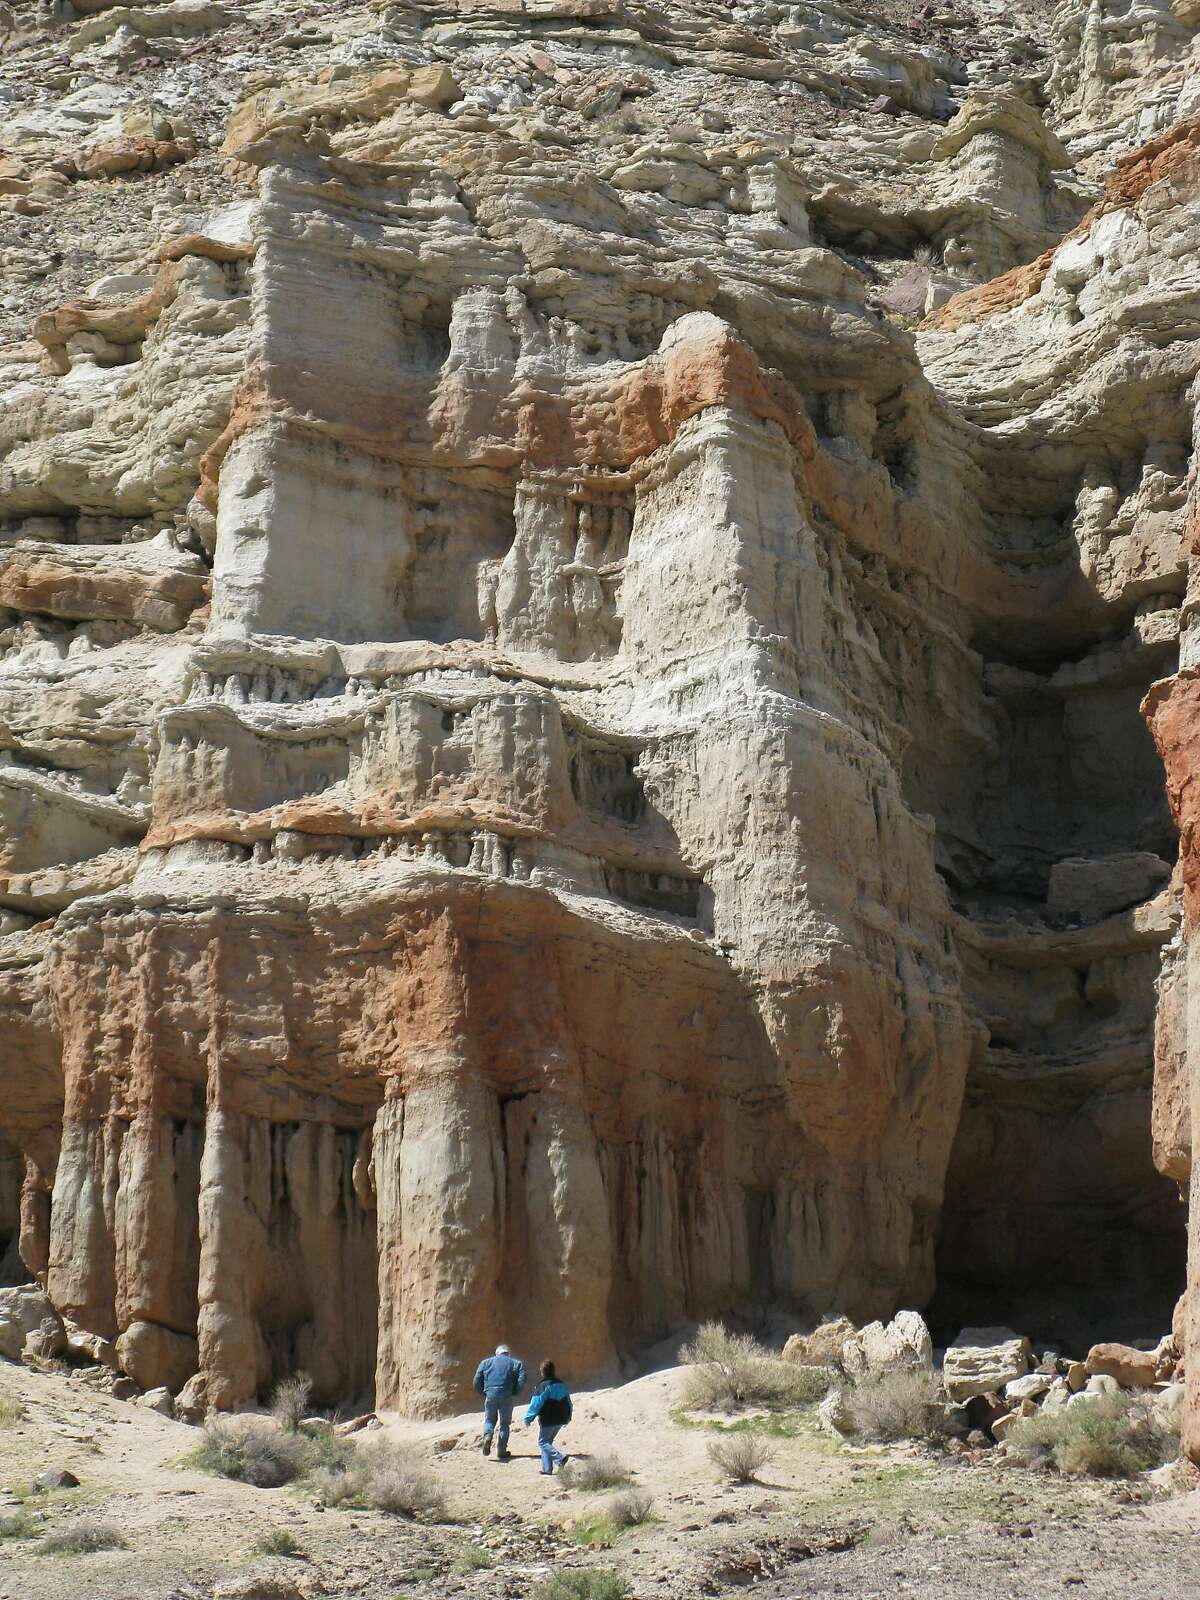 Hikers stand at the base of surreal cliffs in Red Rock Canyon State Park, about 80 miles east of Bakersfield.